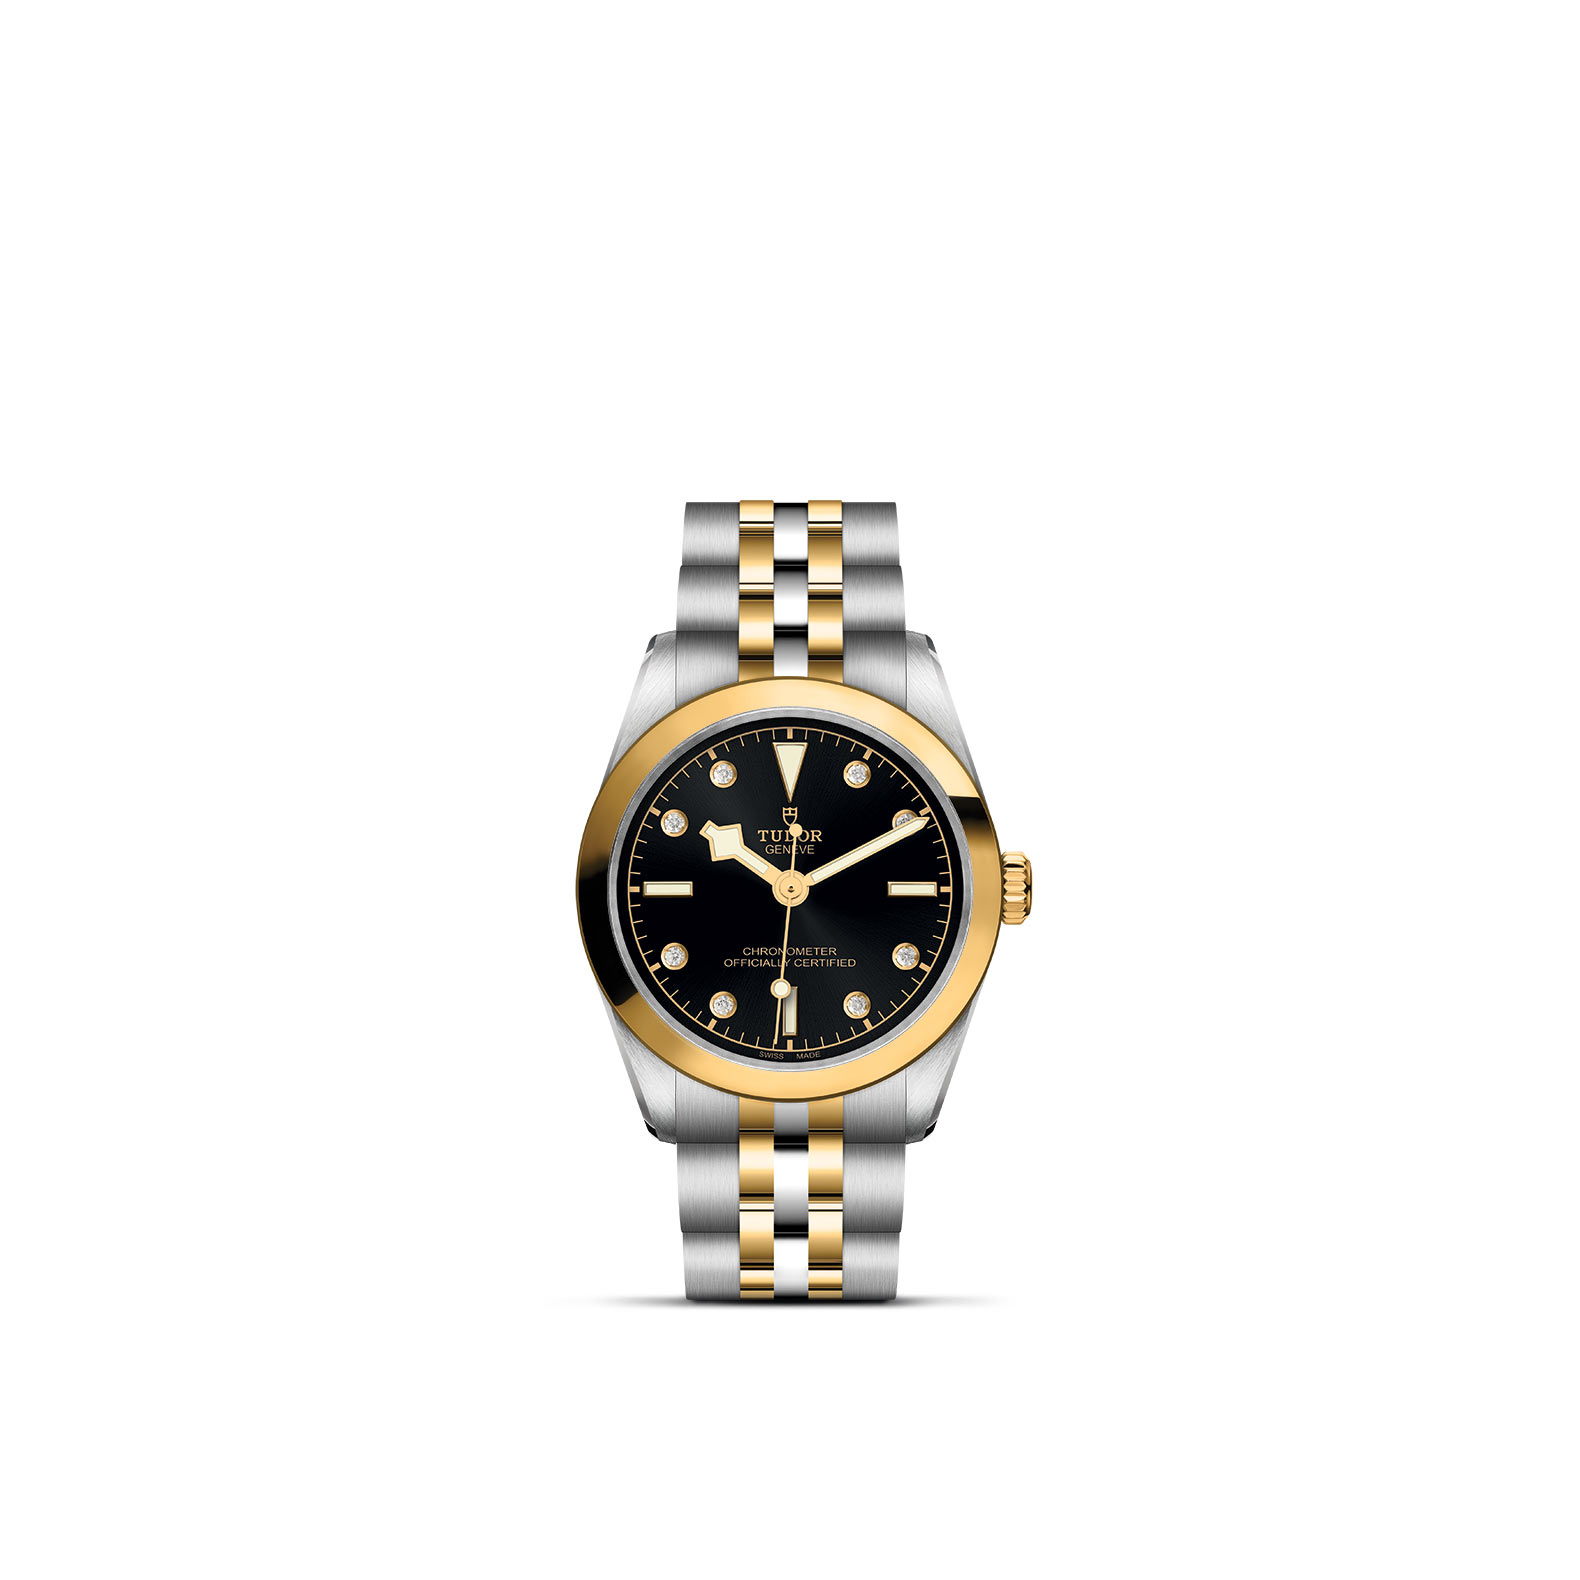 TUDOR BLACK BAY 31/36/39/41 standing upright, highlighting its classic design against a white background.